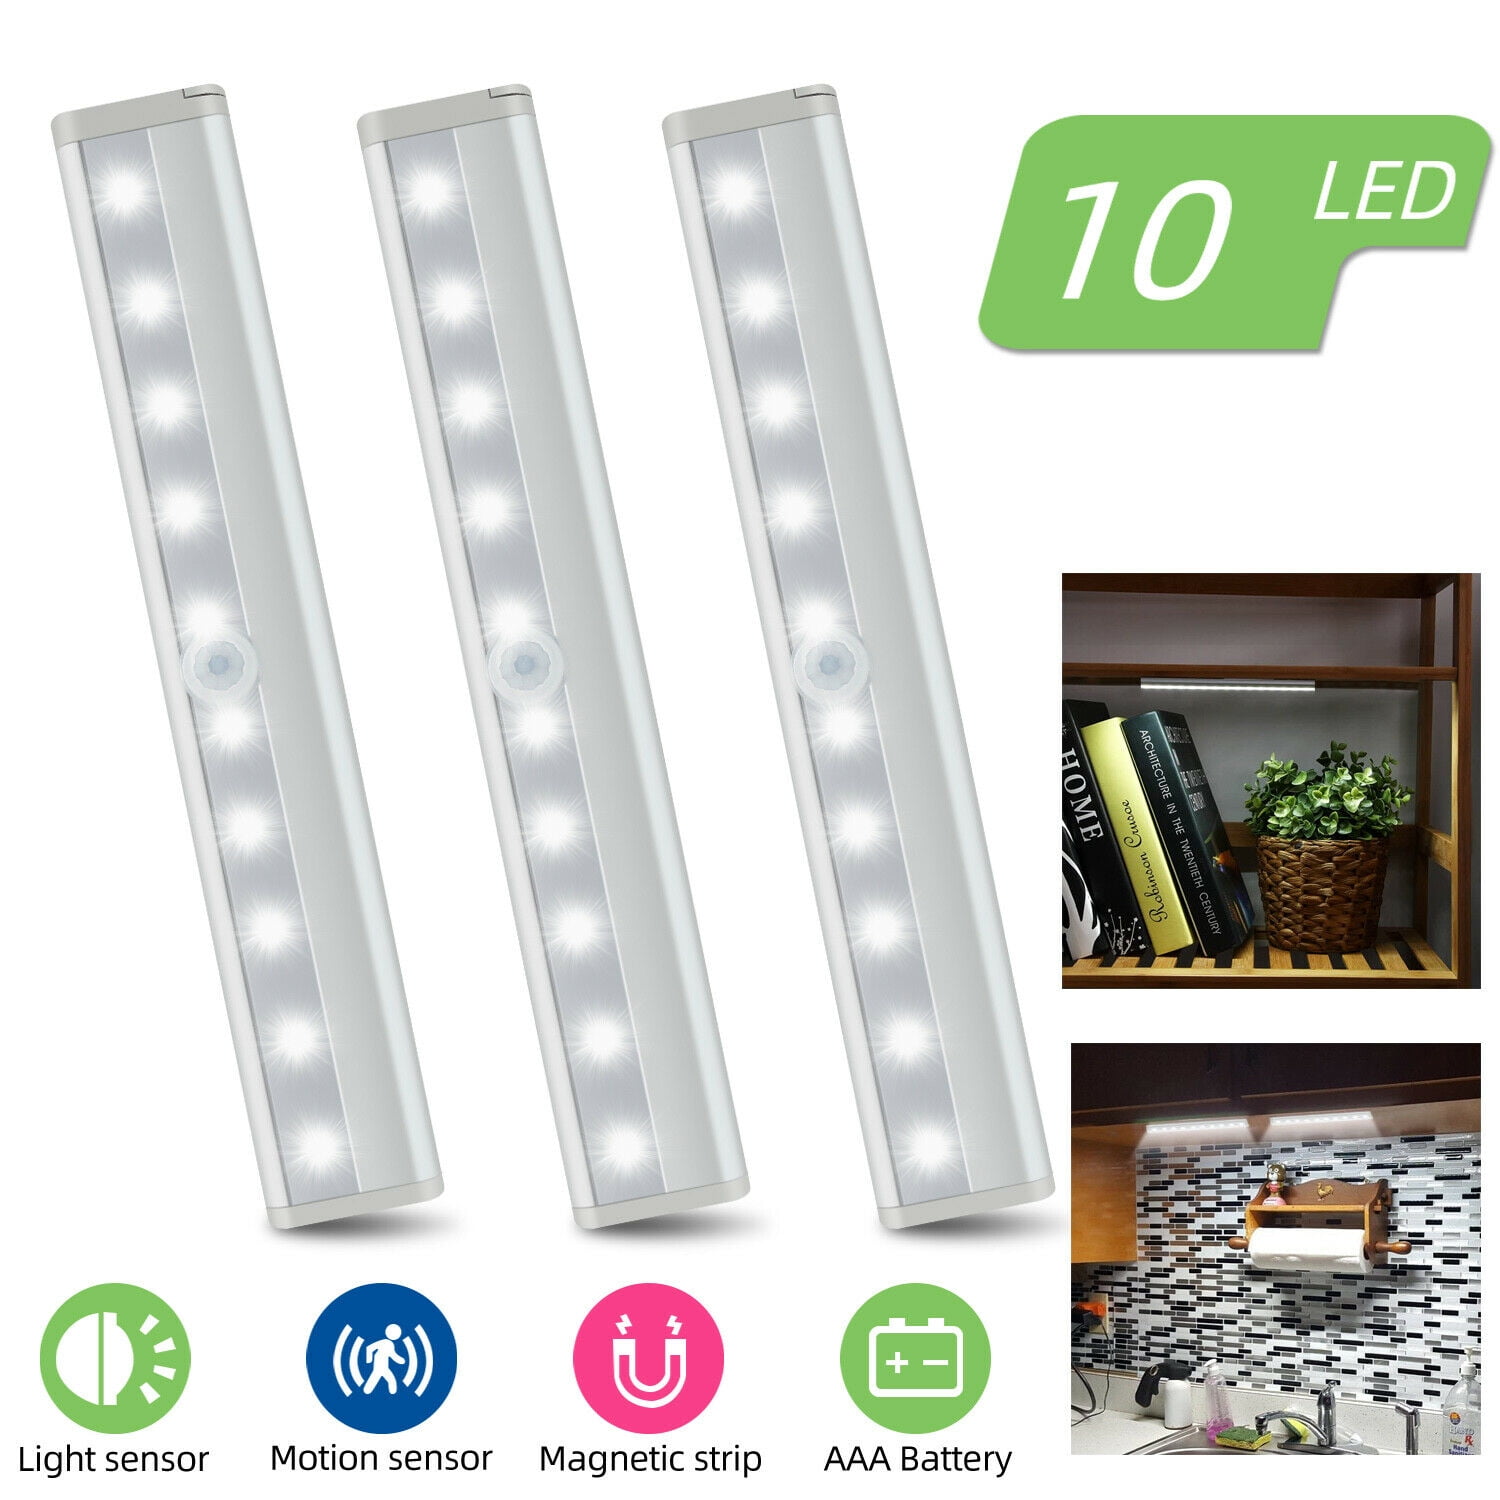 5PCS Magnetic Strip Wireless Motion Sensor Movement Detection Night Light Portable & Rechargeable 4 Pack for Stairs Kitchen Wardrobe Closet Cabinets Cupboard Motion Activated 10 LED Light 